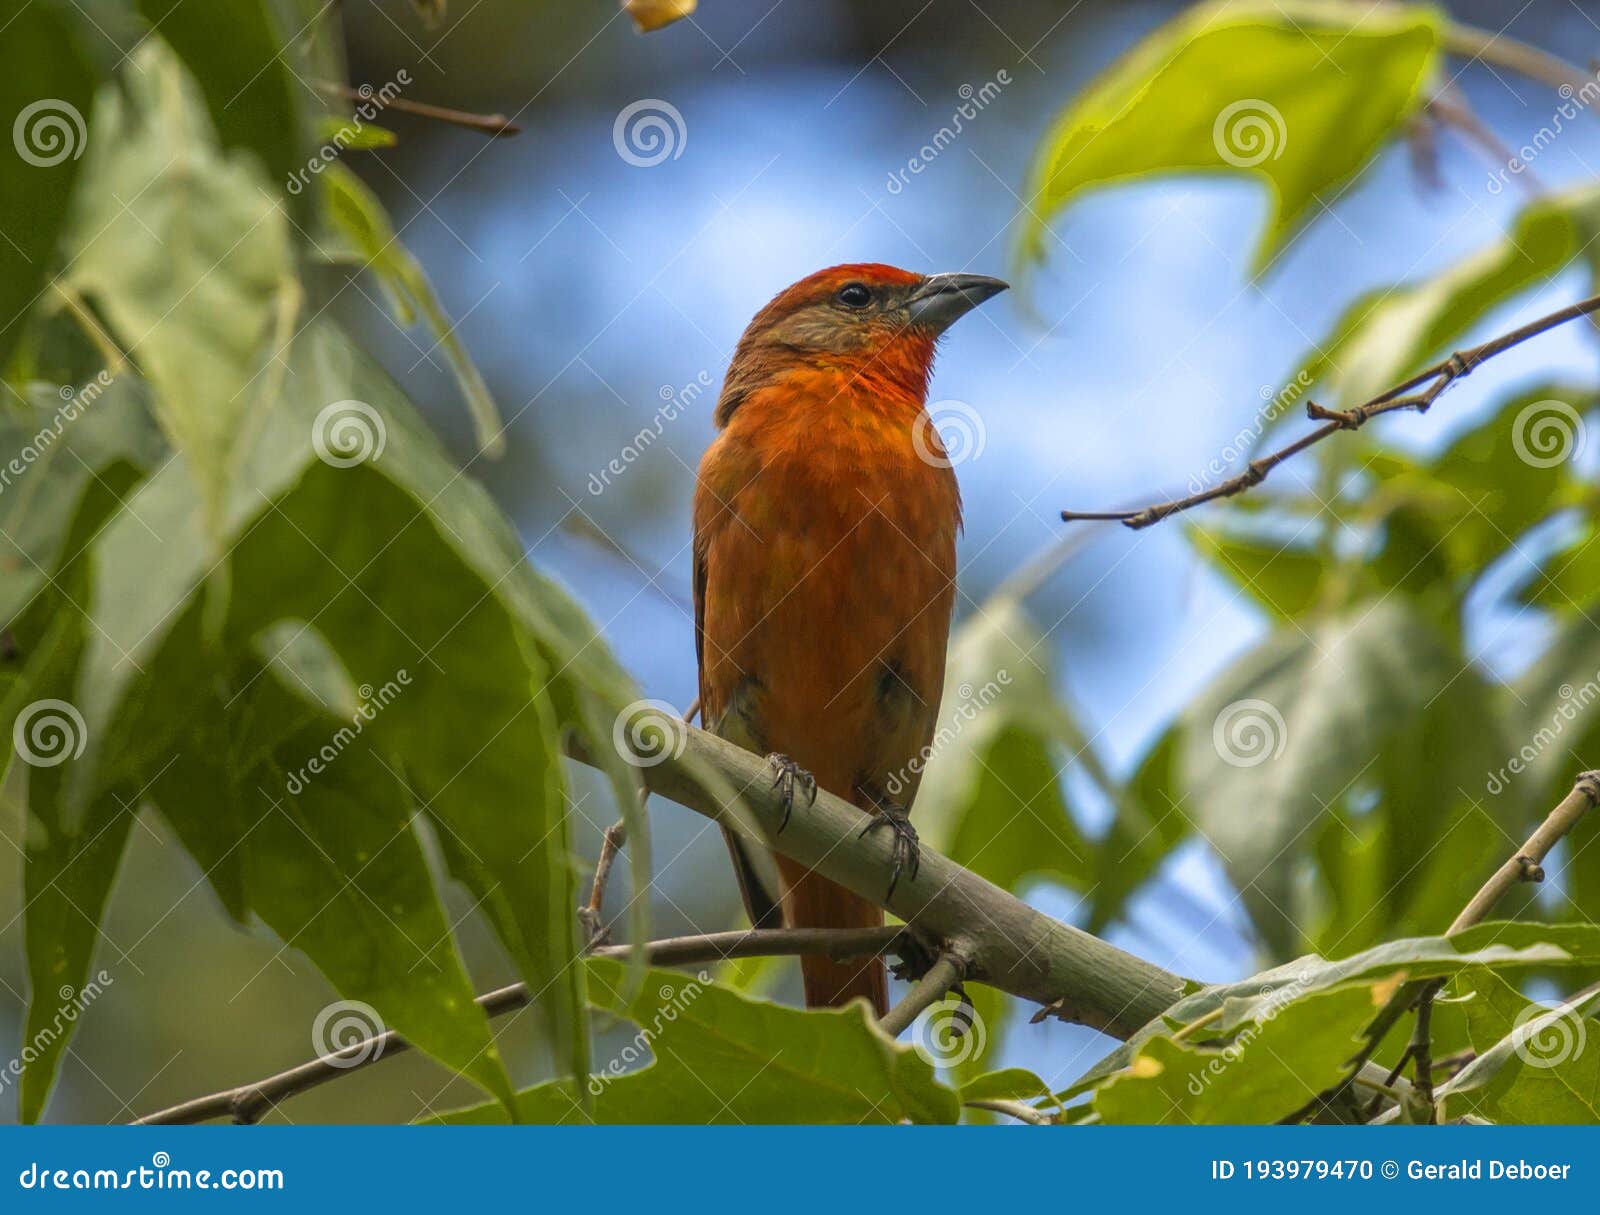 hepatic tanager in arizona forest